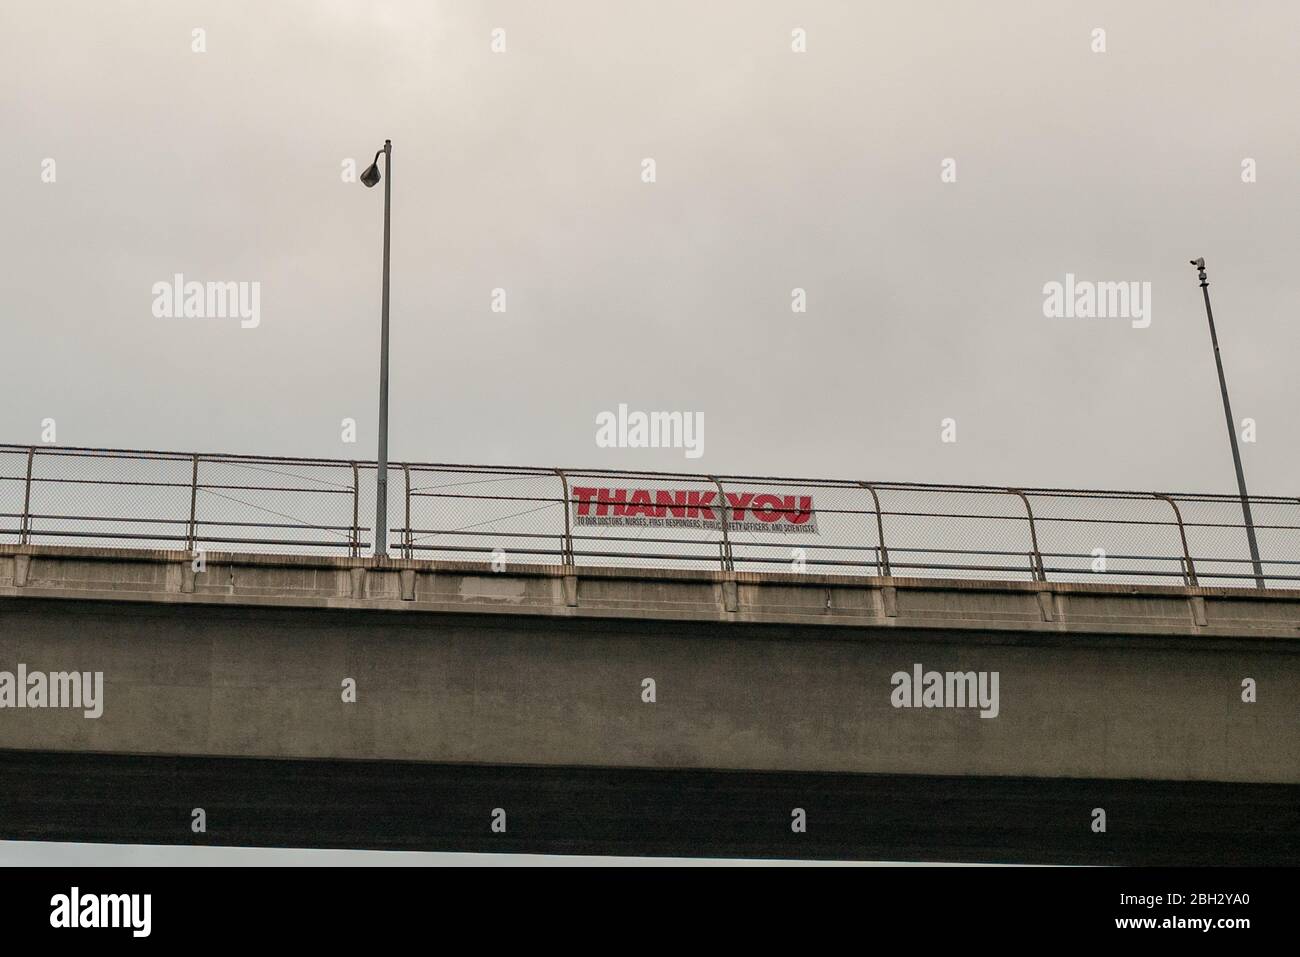 A sign has been placed on a highway overpass thanking first responders and scientists during an outbreak of the COVID-19 coronavirus, Walnut Creek, California, March 30, 2020. () Stock Photo